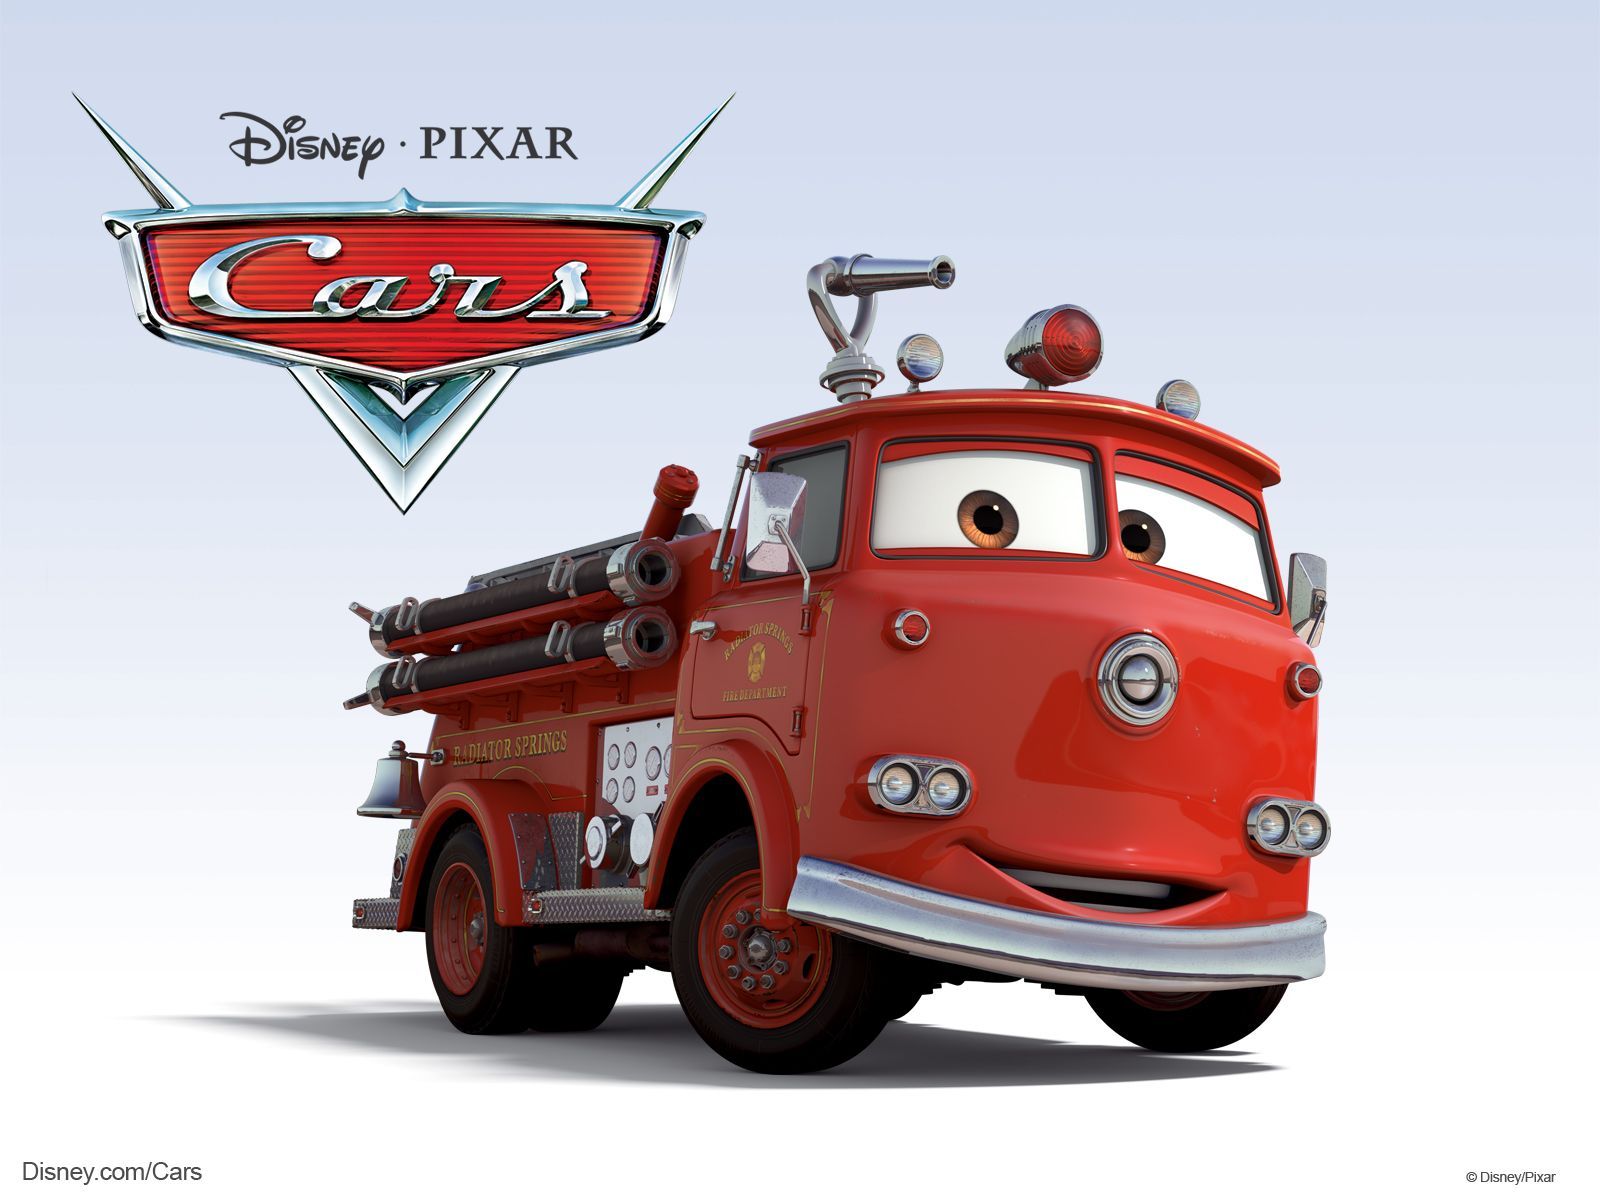 Red (Cars). Disney cars characters, Cars characters, Cars movie